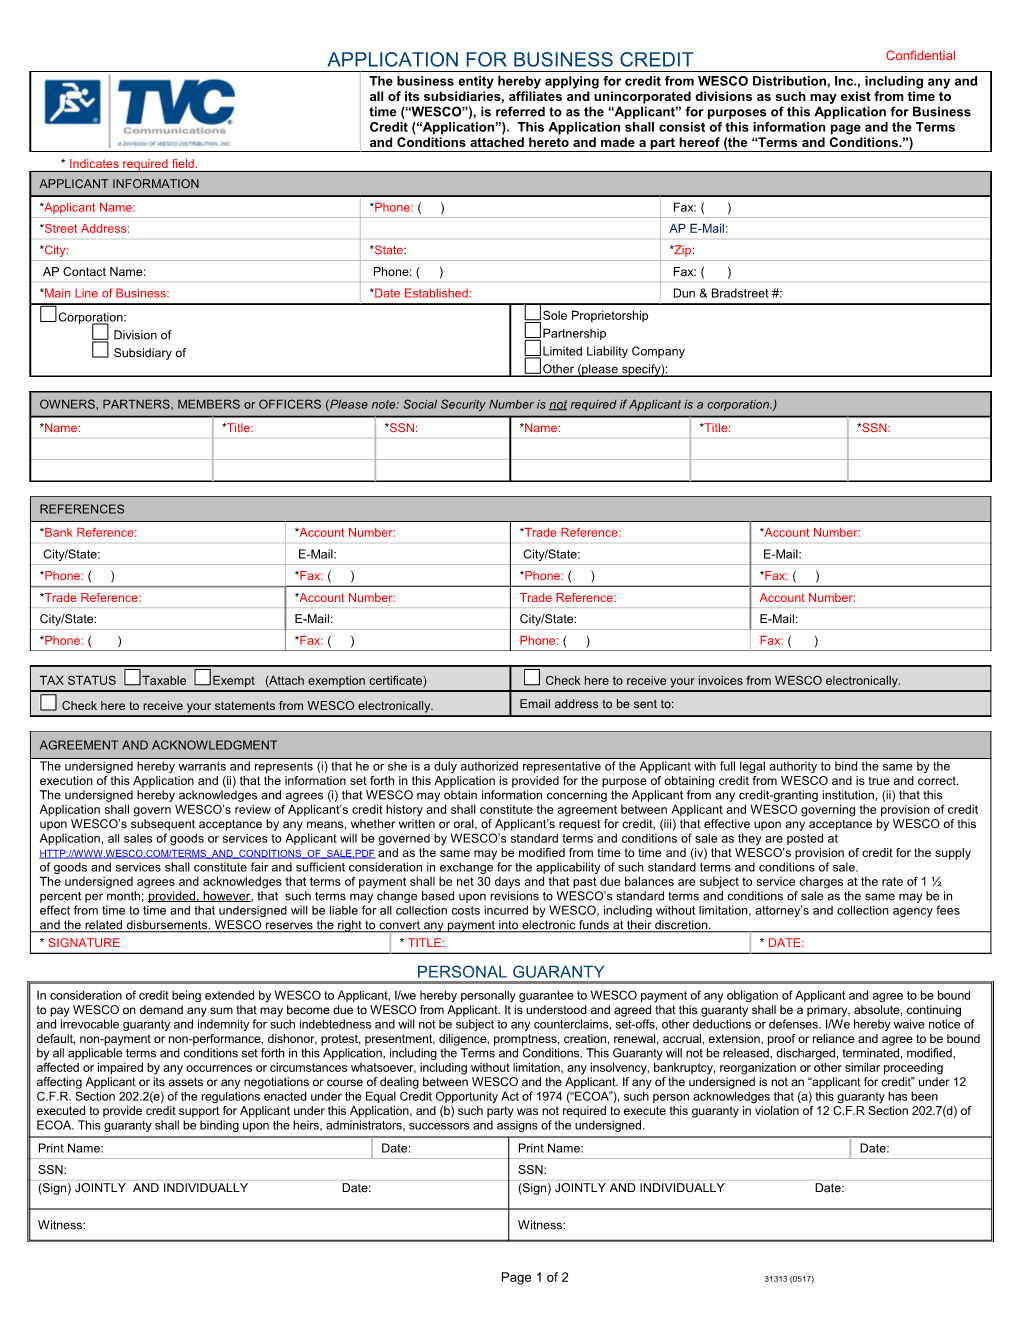 Application for Business Credit